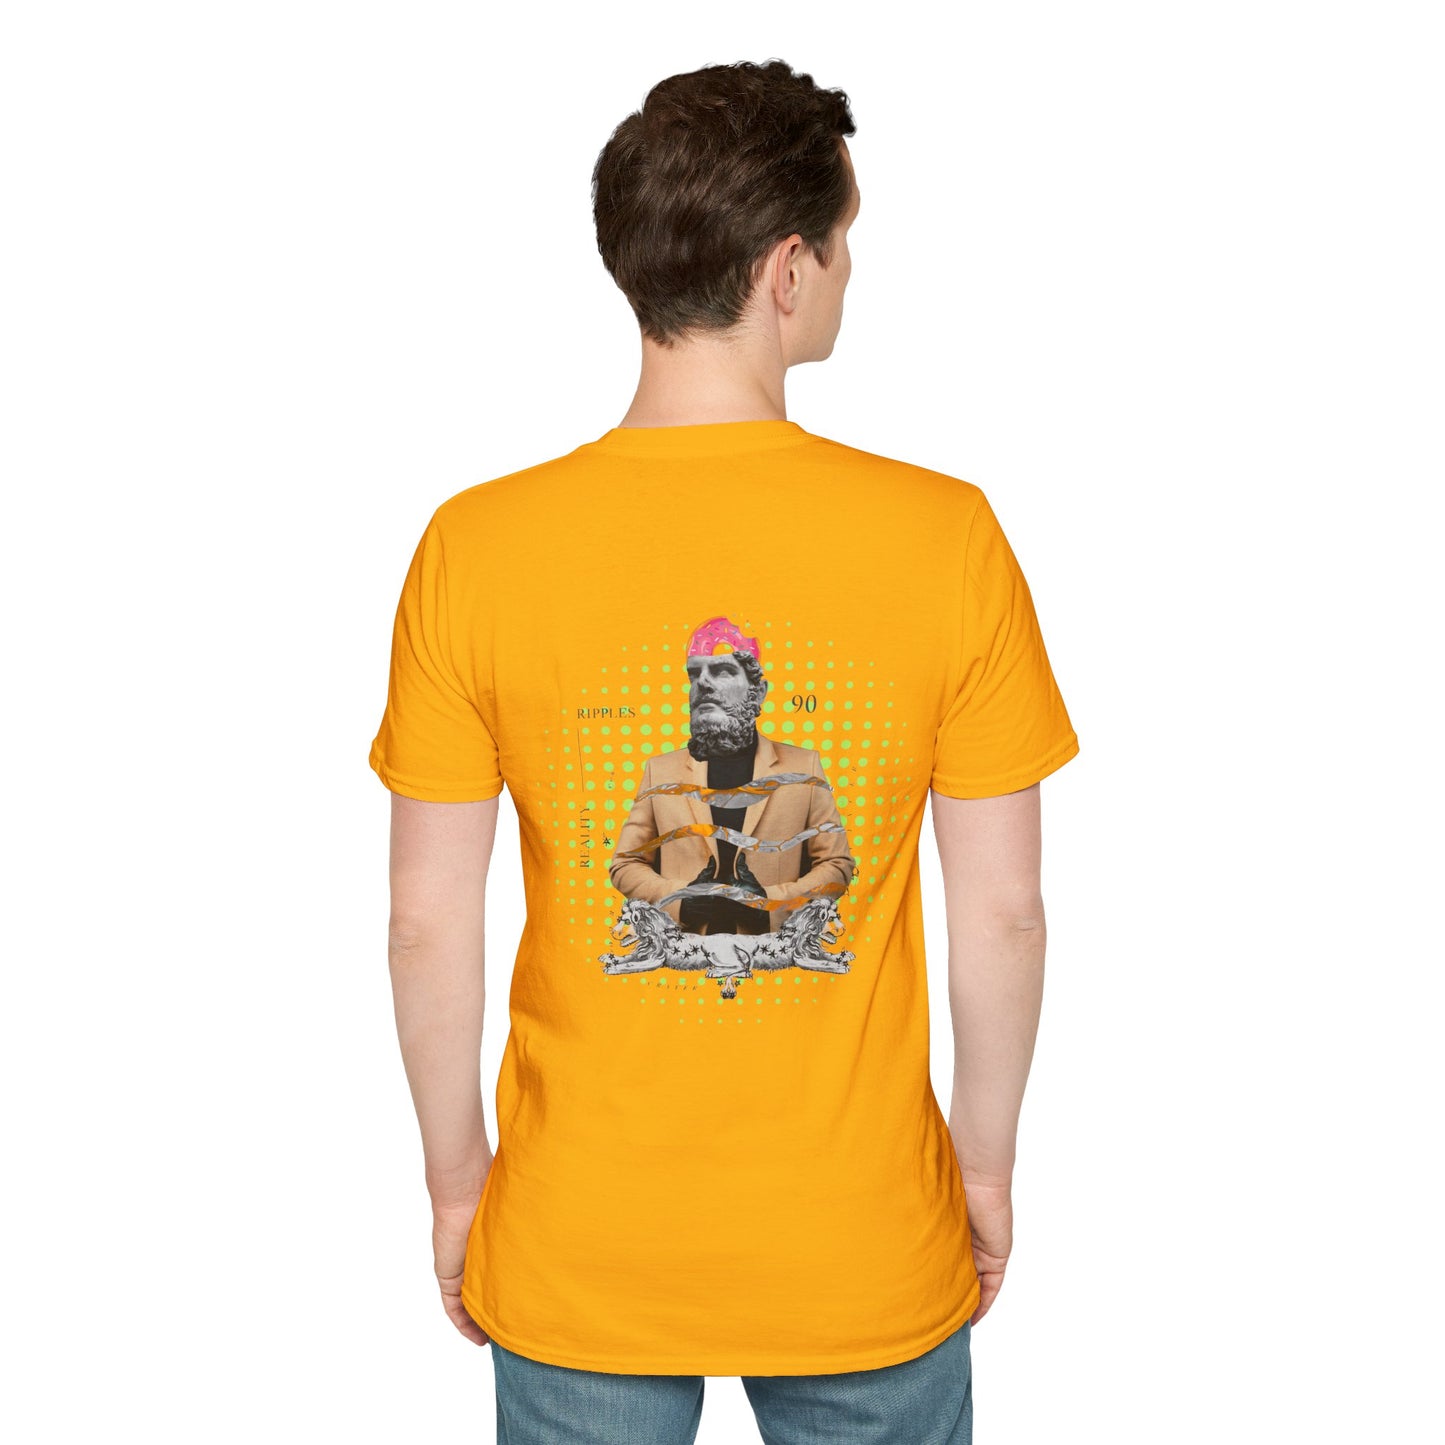 White T-shirt featuring a collage of a Greek statue head with a modern glitch art twist